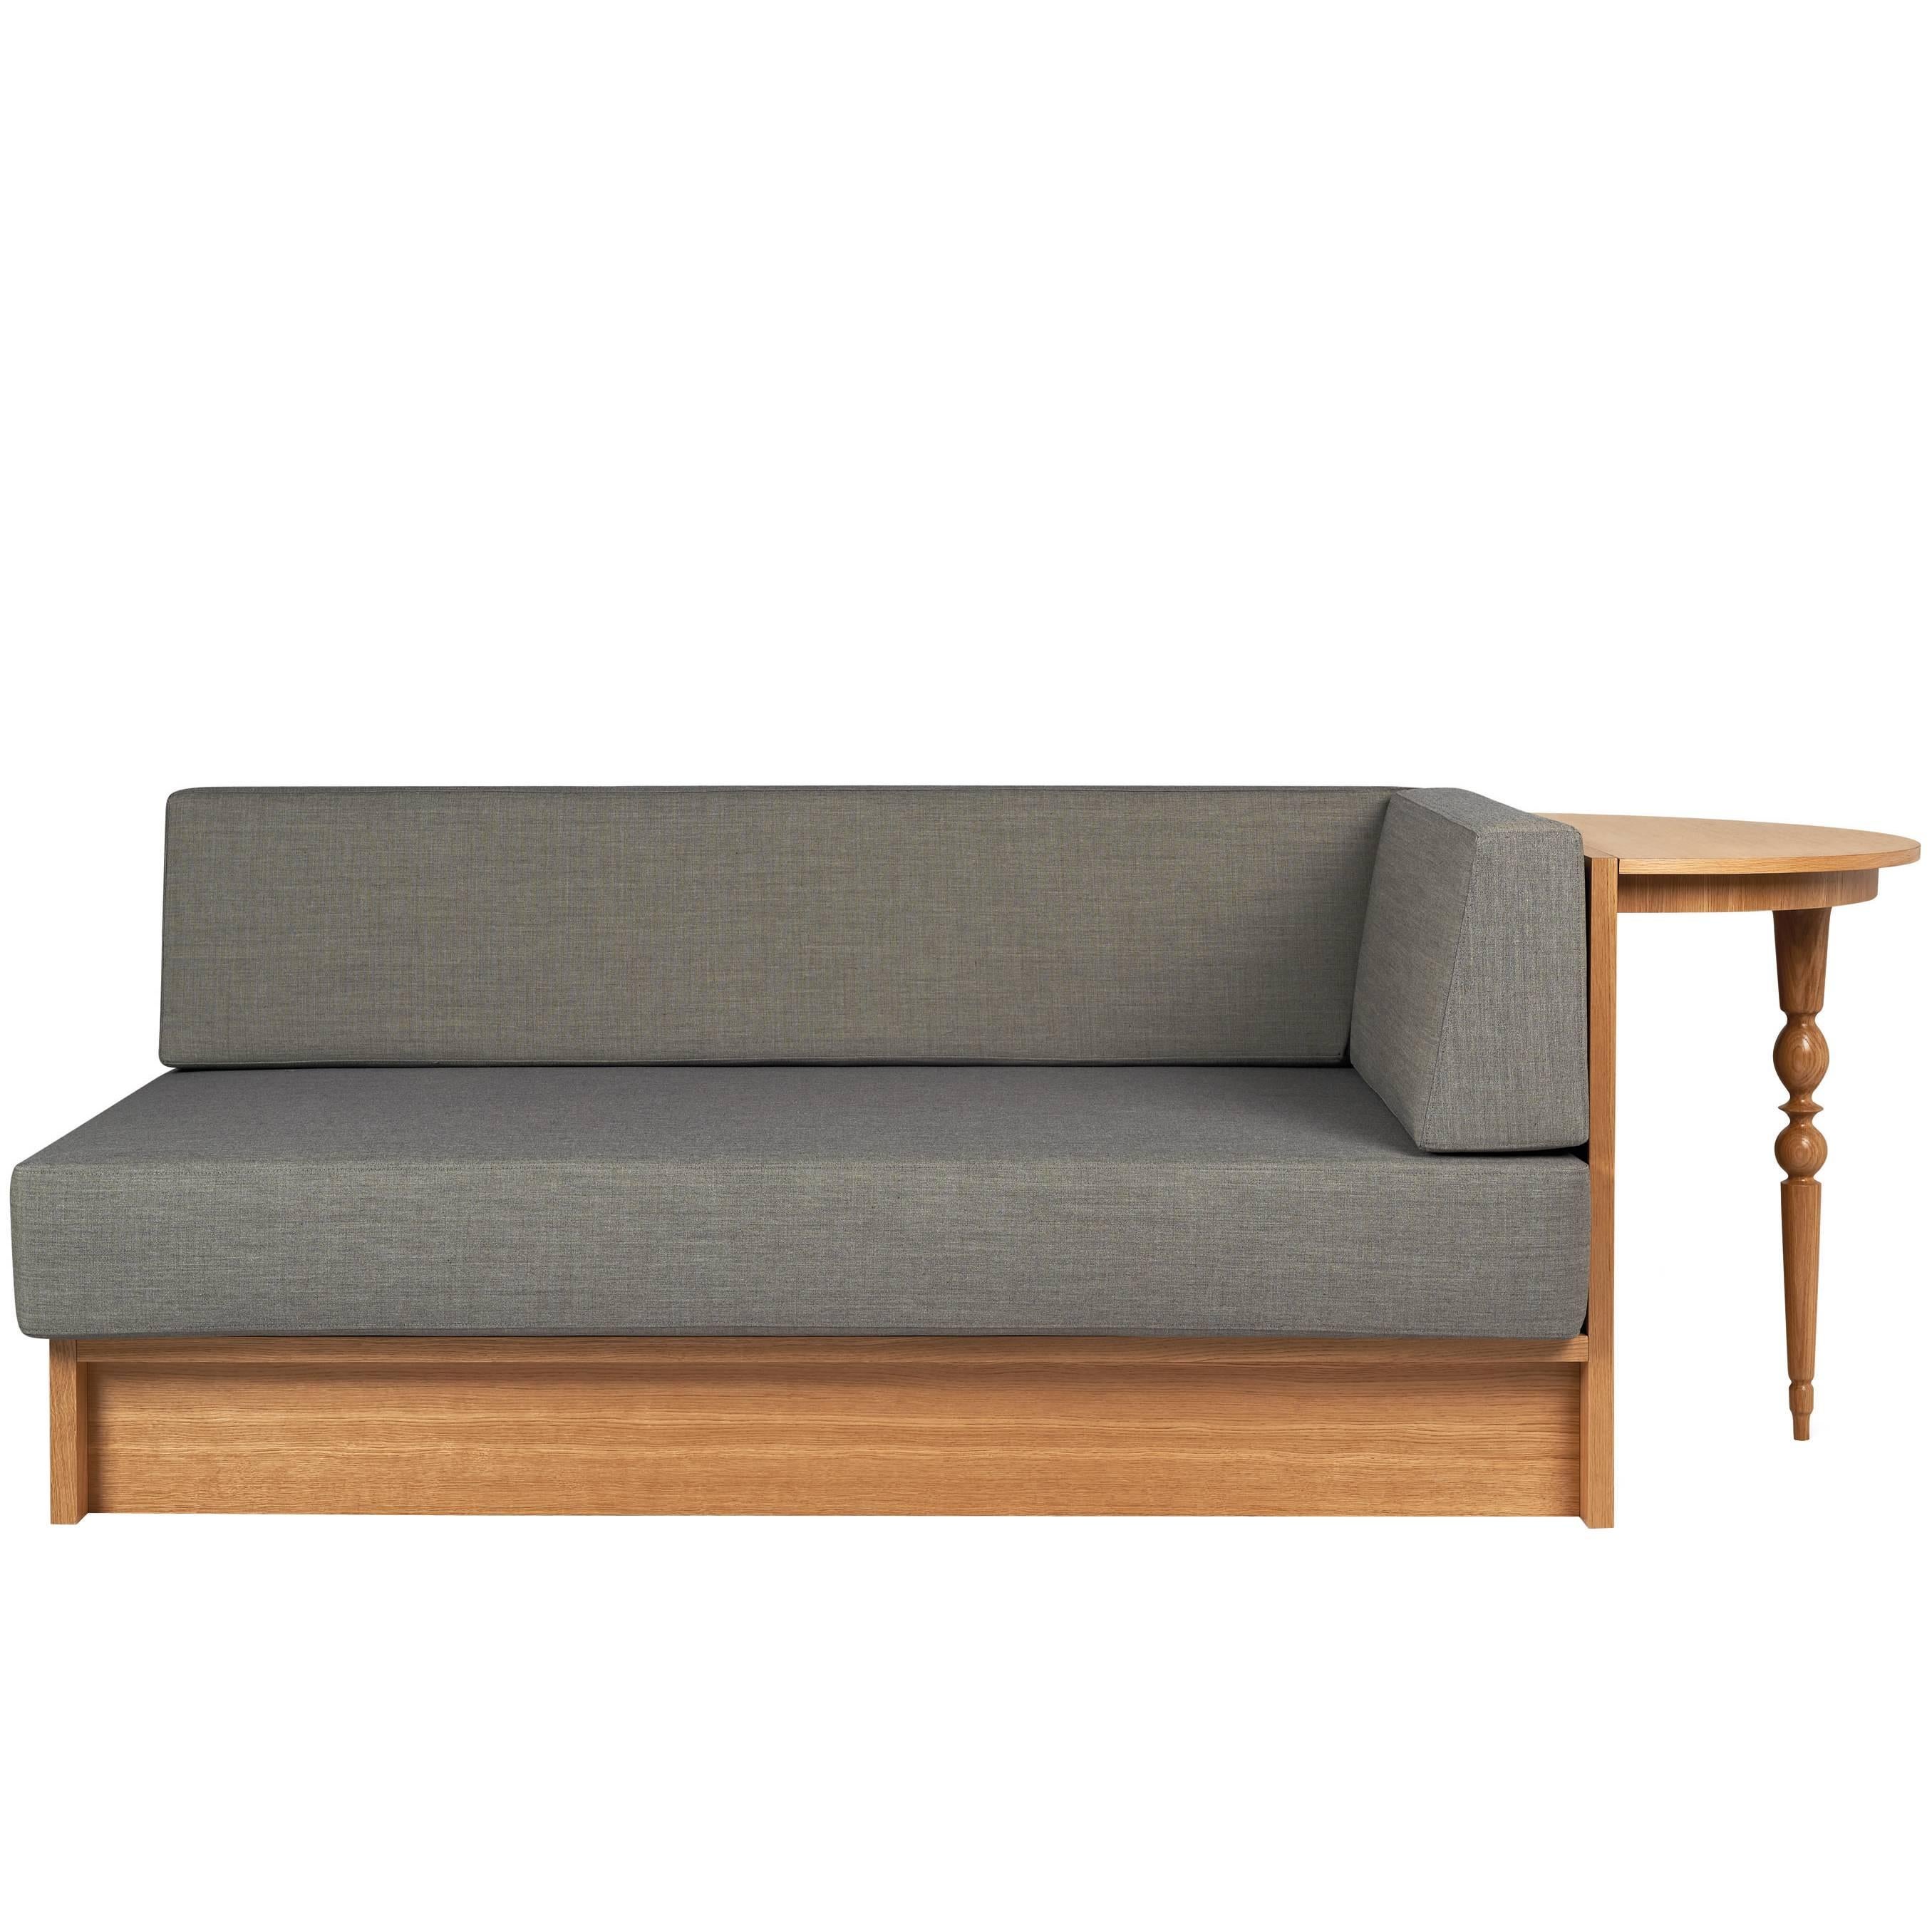 Coated Oak Veneer Daybed with Side Table by Sam Baron